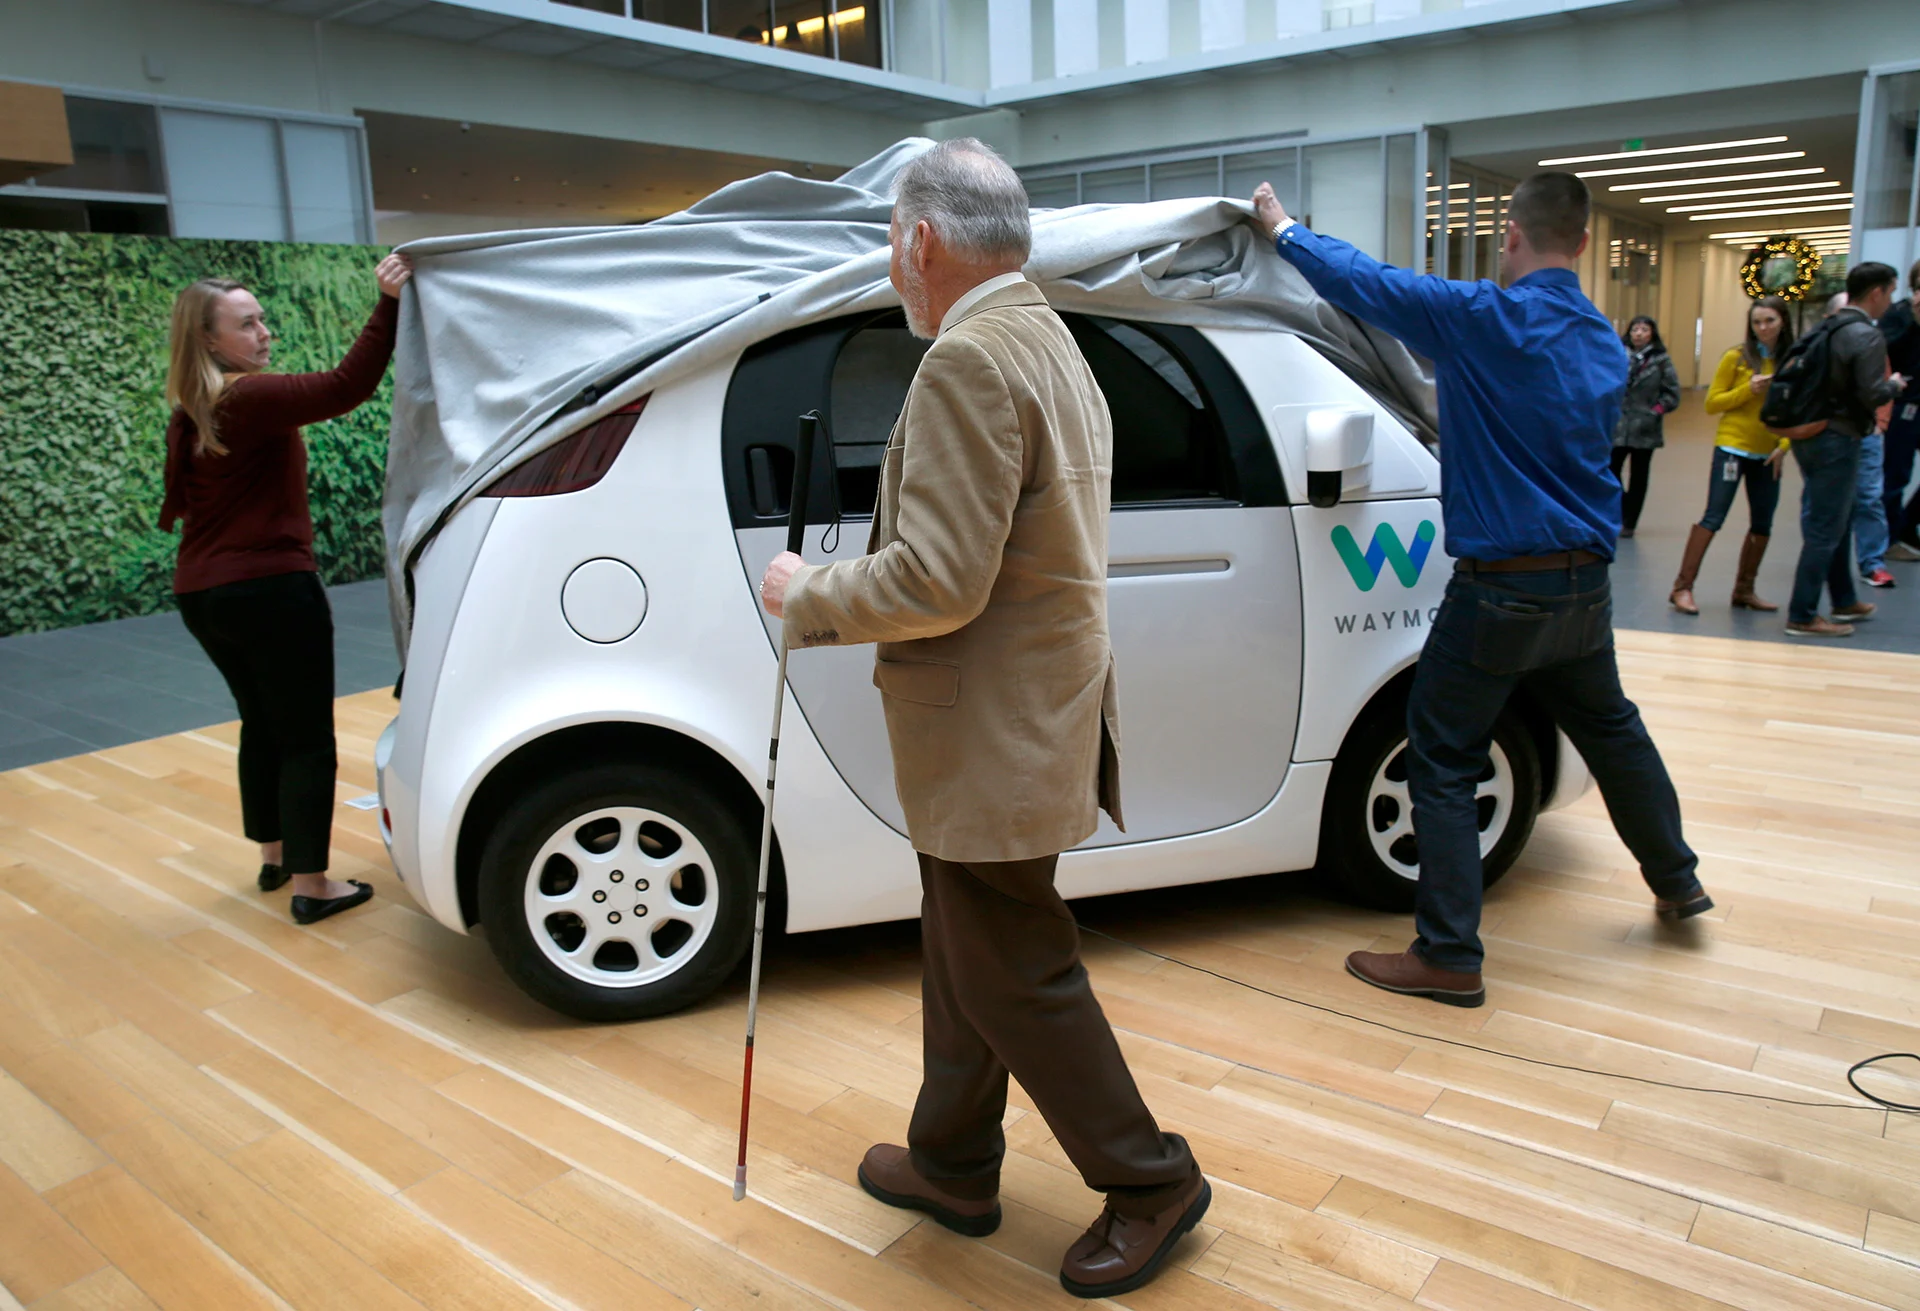 Steve Mahan, the blind first user of the Waymo, waits for employees to unveil the driverless car at Google's offices in San Francisco, California. (San Francisco Chronicle/Hearst Newspapers/ Getty Images)